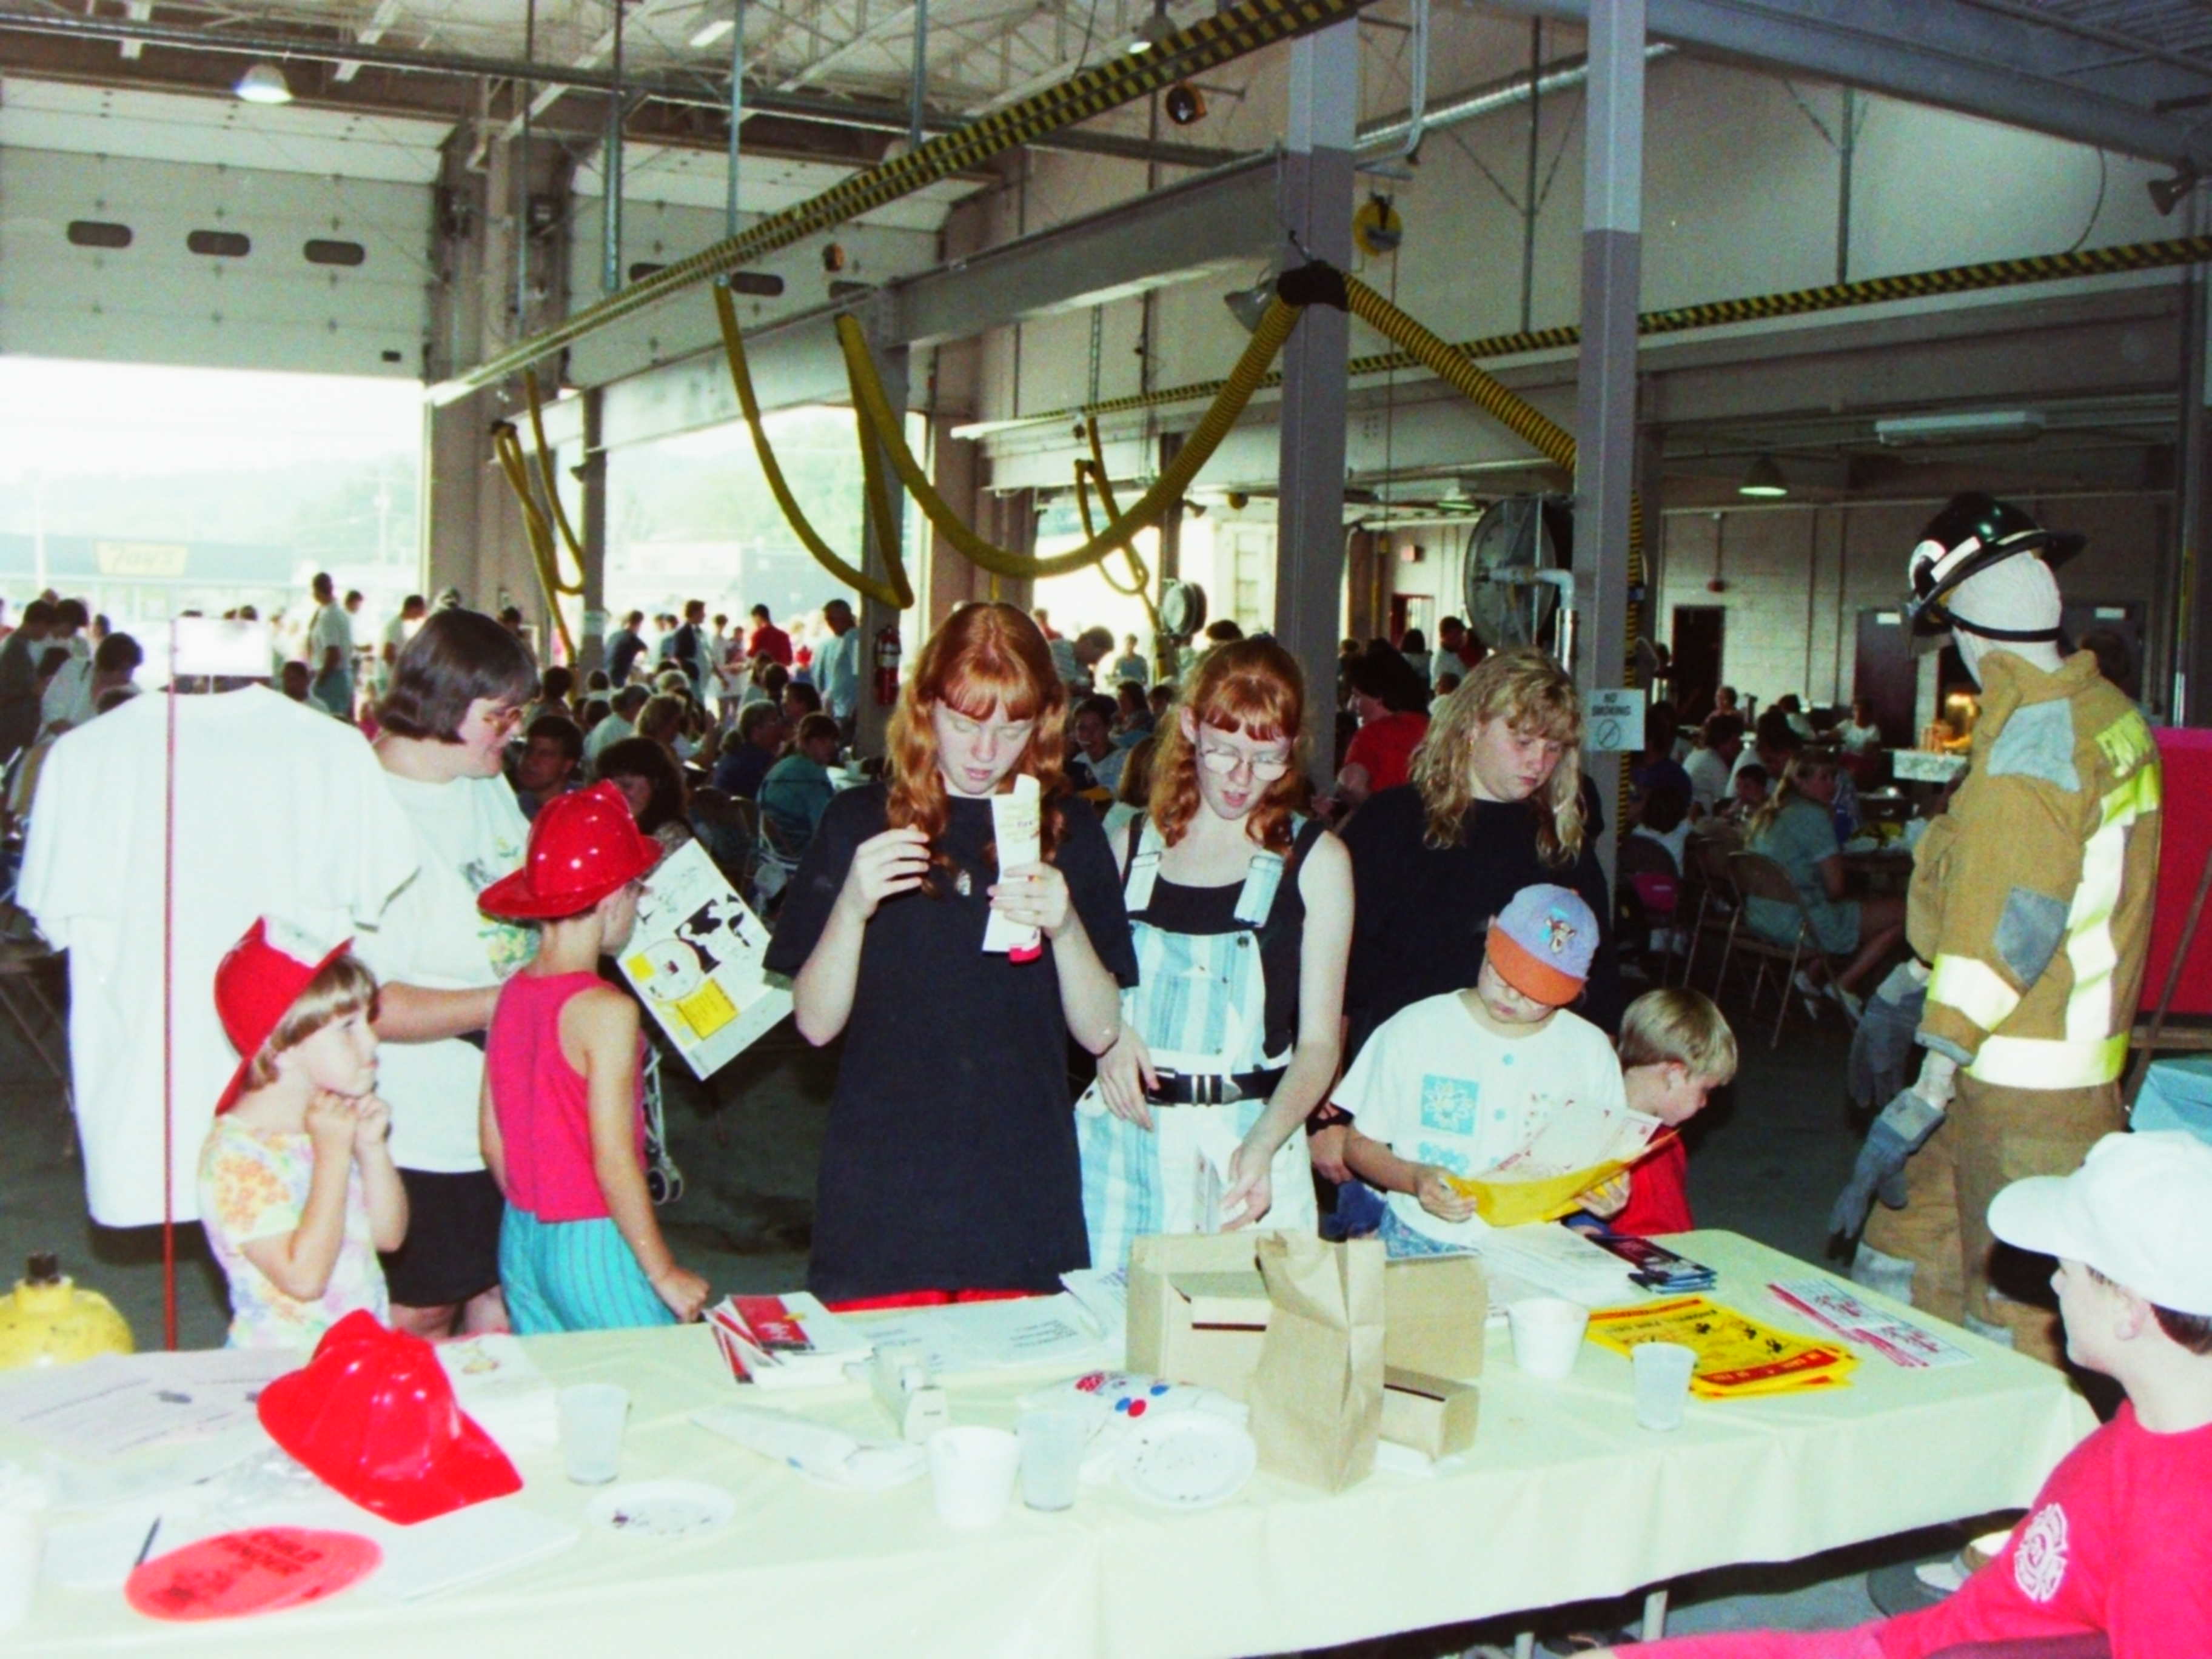 00-00-95  Other - Ice Cream Social